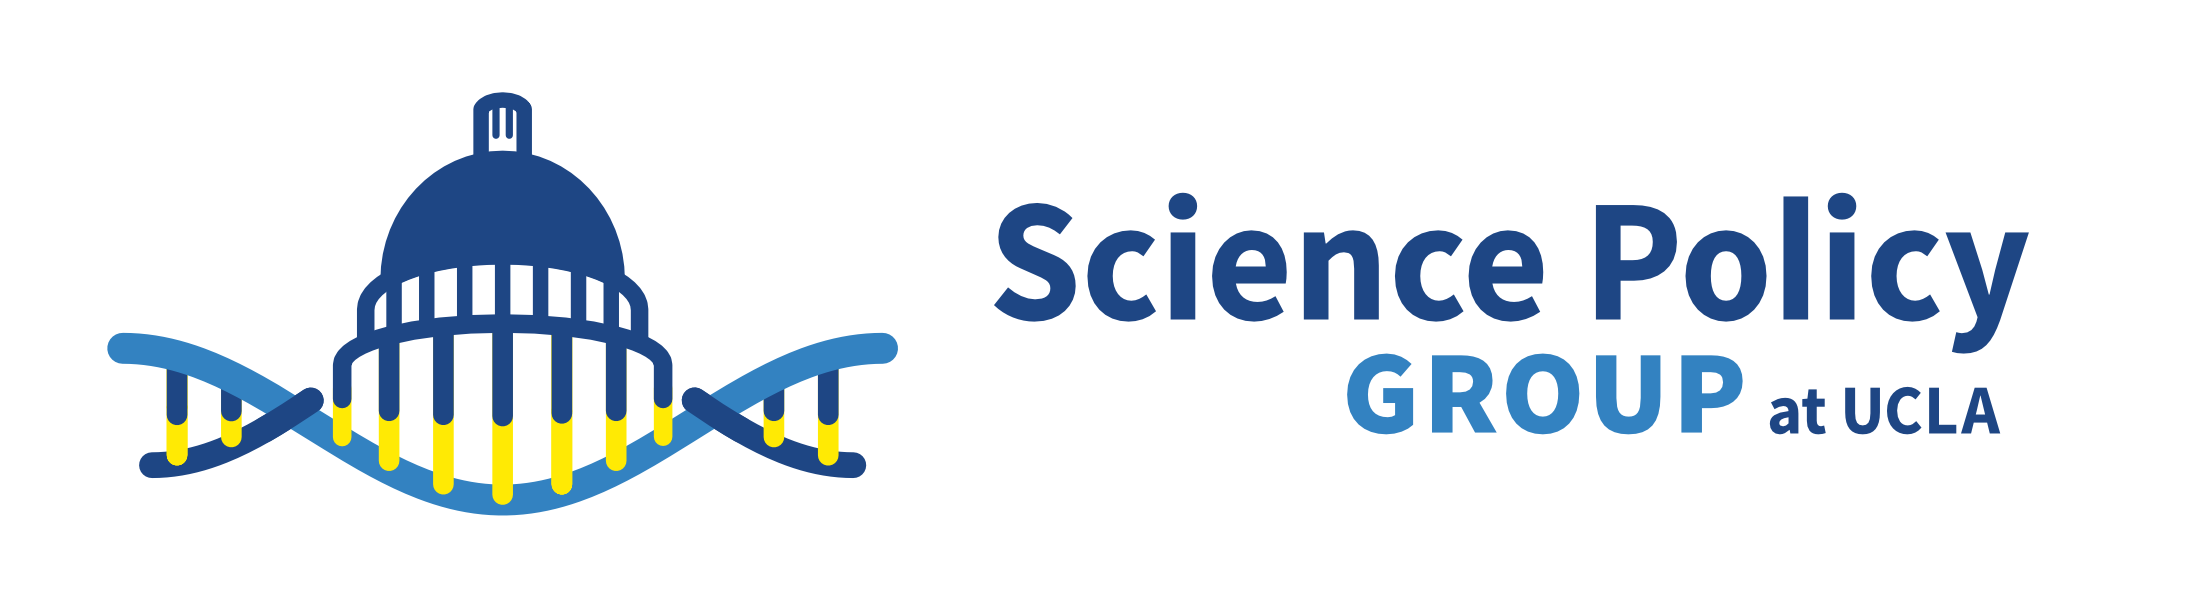 Science Policy Group at UCLA: Logo + Wordmark